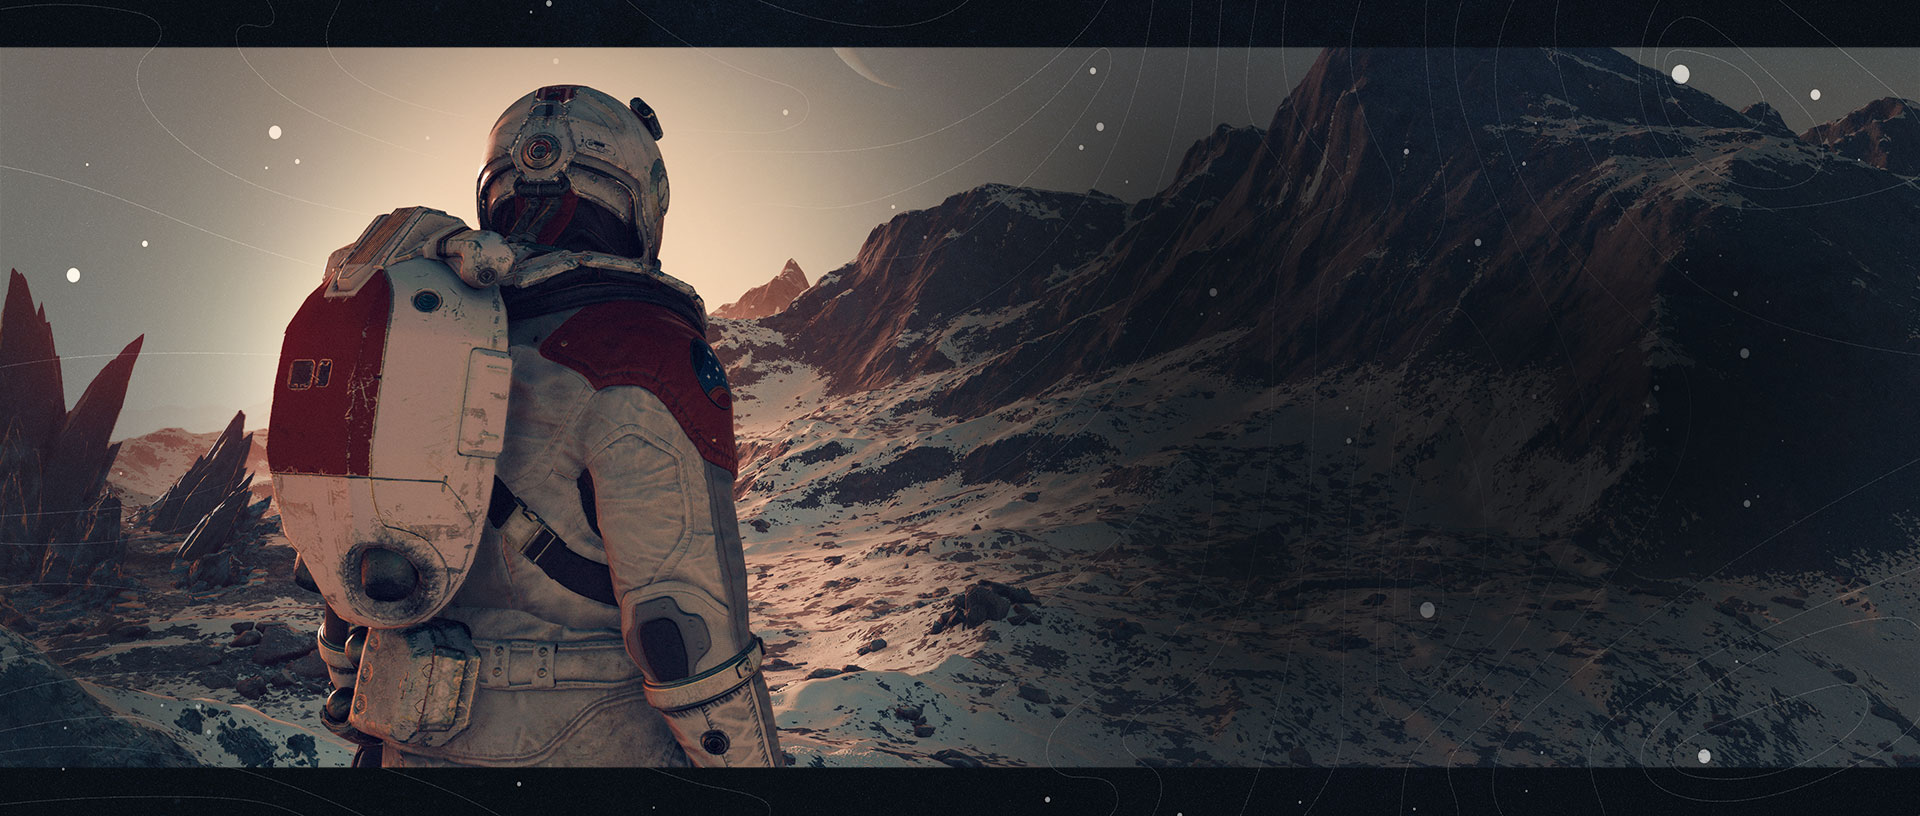 An explorer gazes out at snowy mountain tops as a ringed planet looms large in the sky.